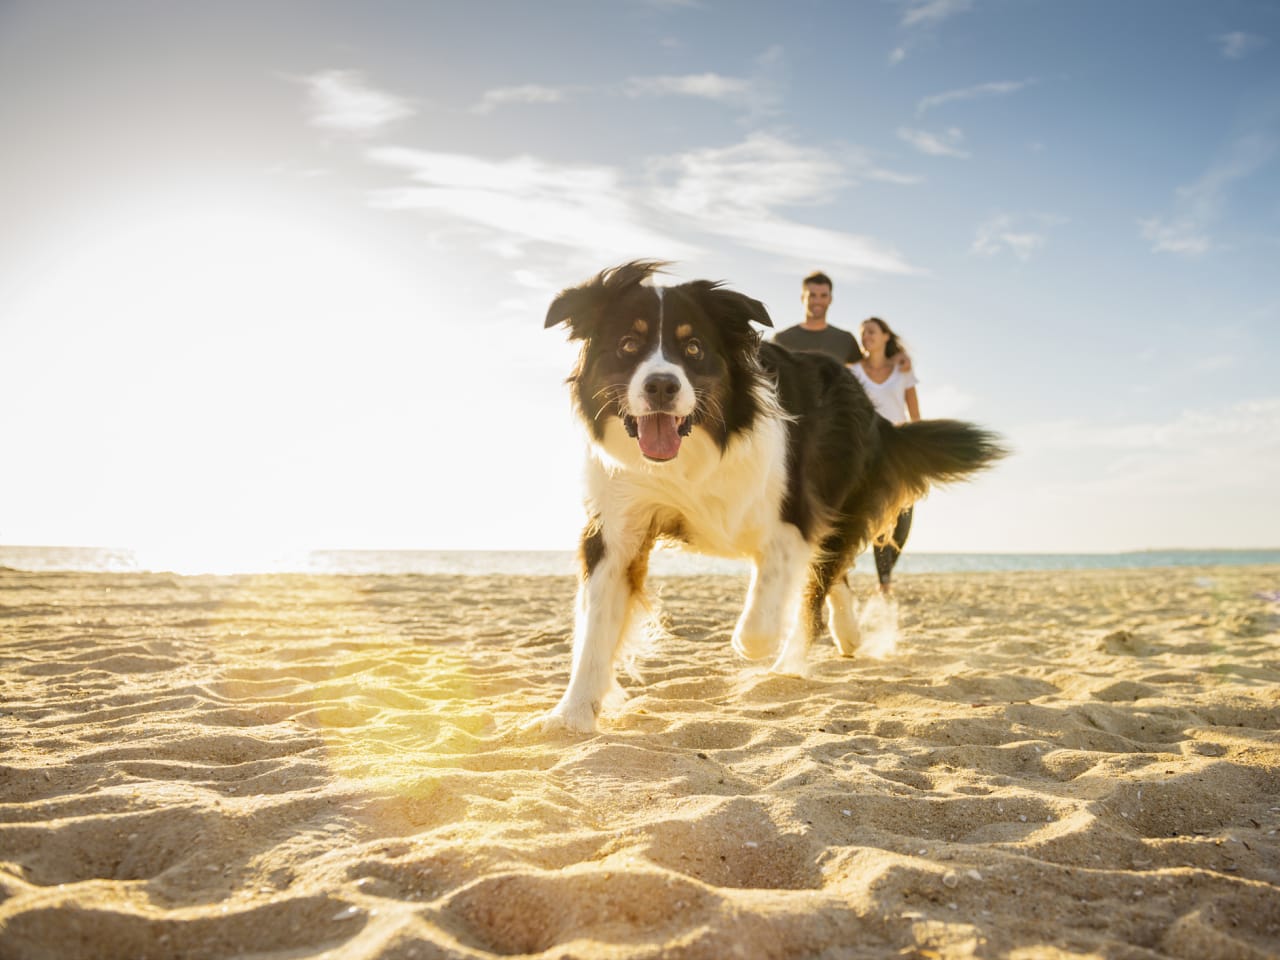 Hund am Strand in Italien © Jacobs Stock Photography Ltd/DigitalVision via Getty Images